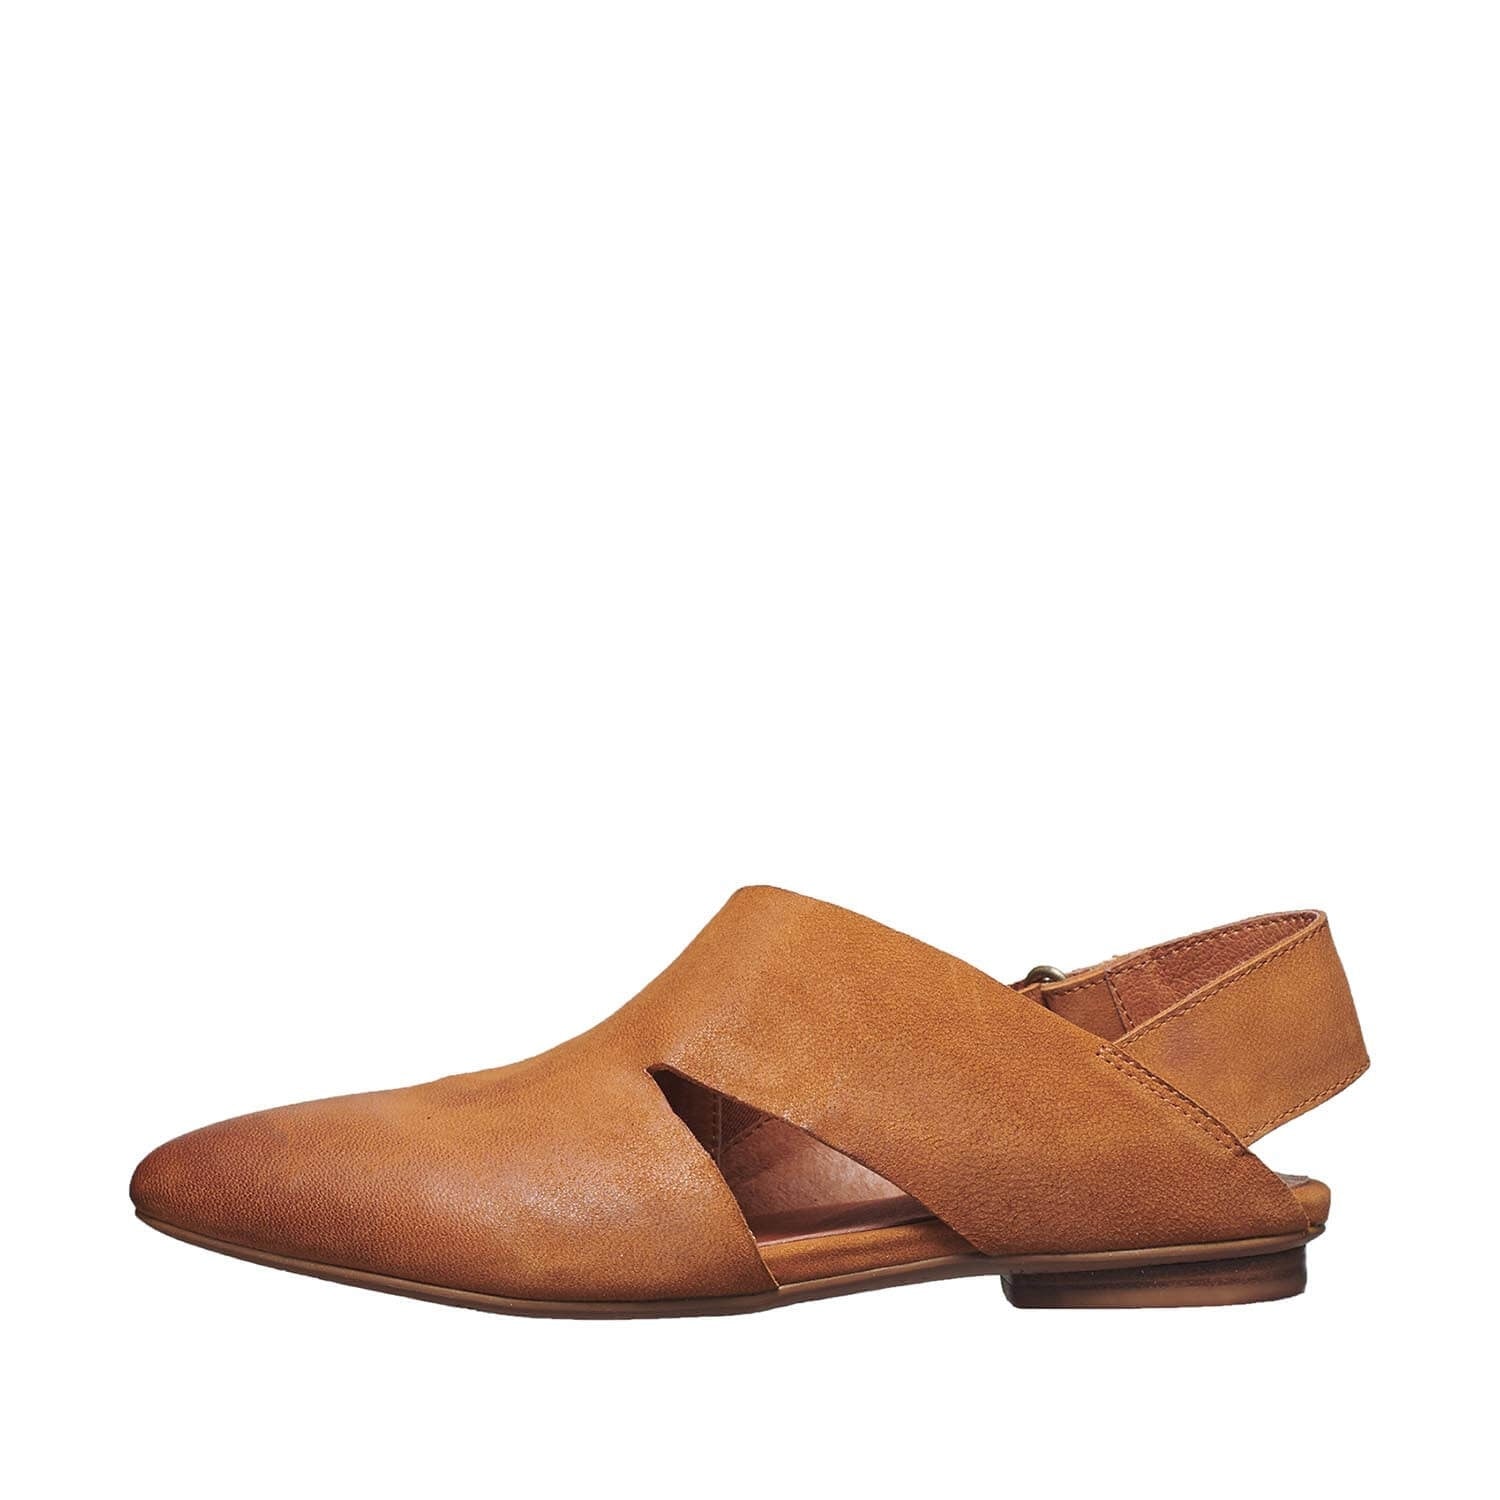 women's leather mules shoes